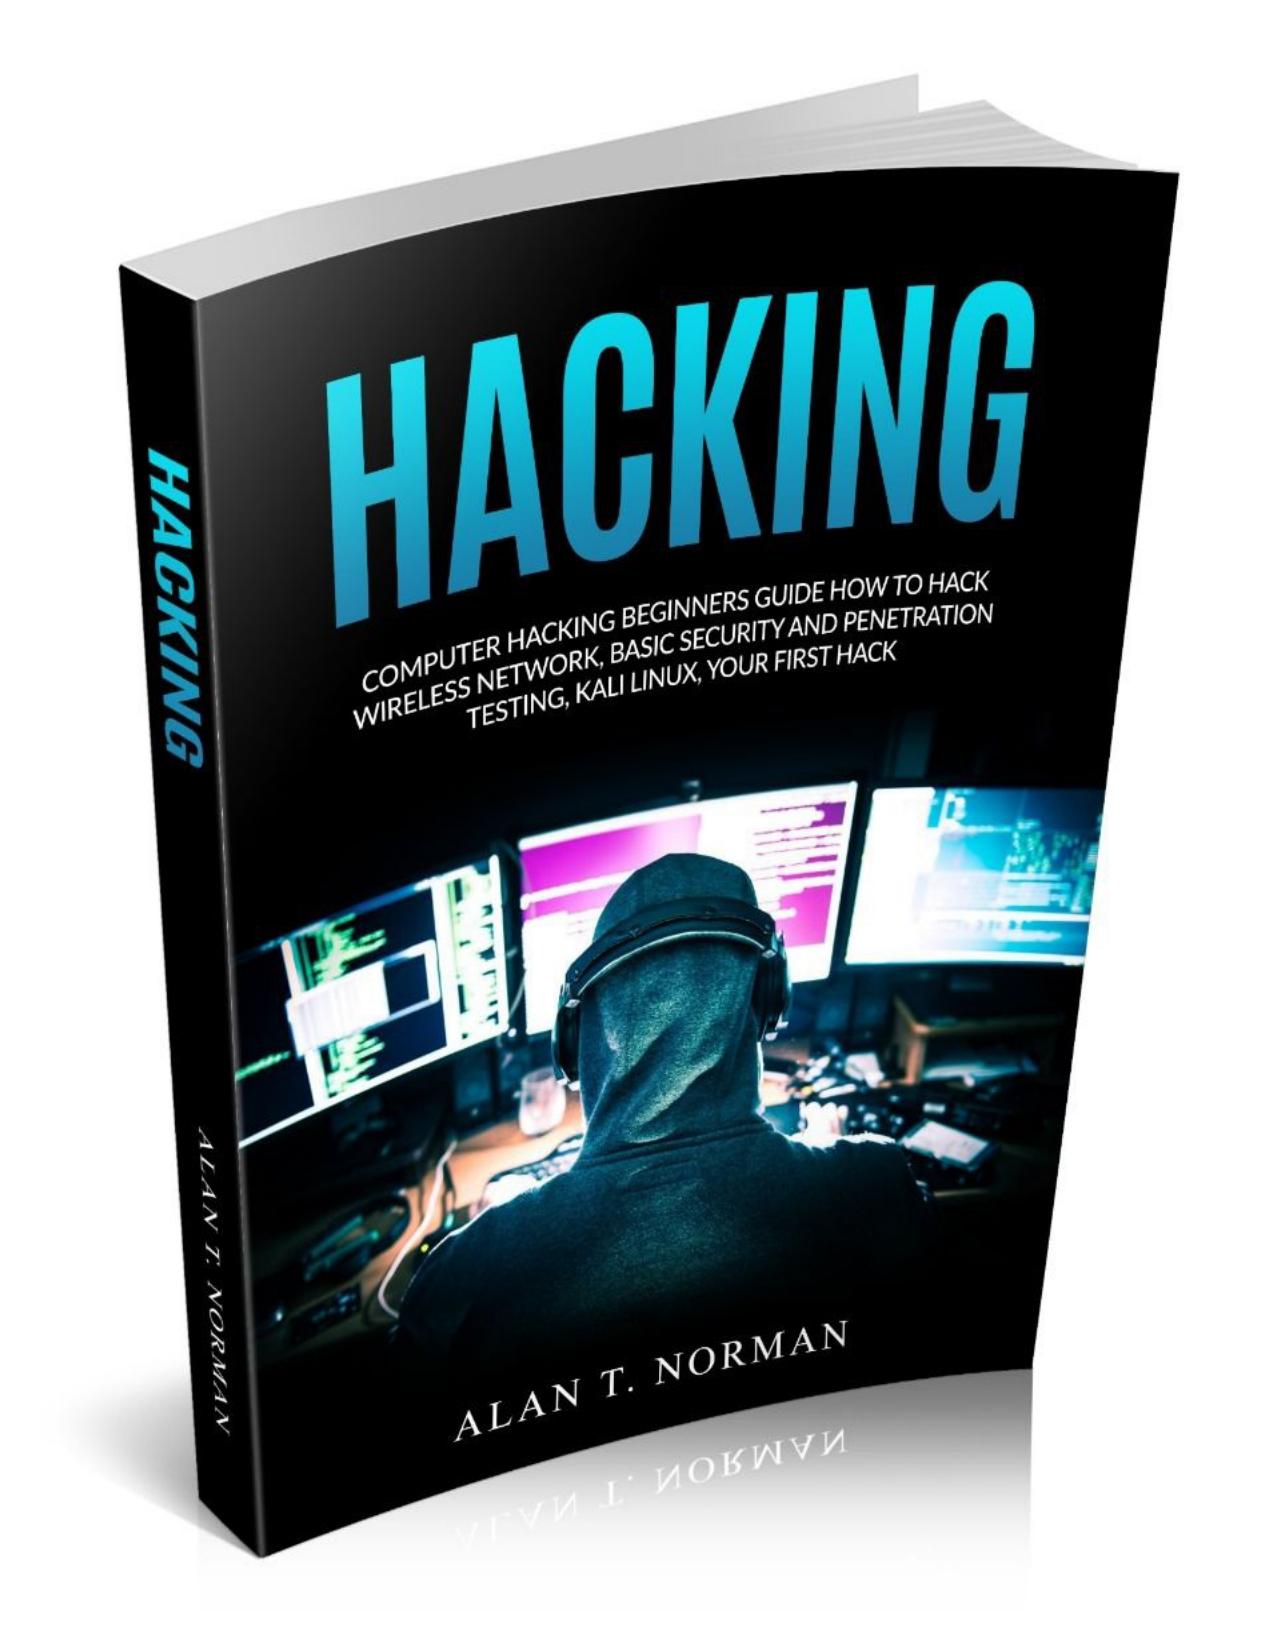 Hacking: Computer Hacking Beginners Guide How to Hack Wireless Network, Basic Security and Penetration Testing, Kali Linux, Your First Hack by Alan T. Norman